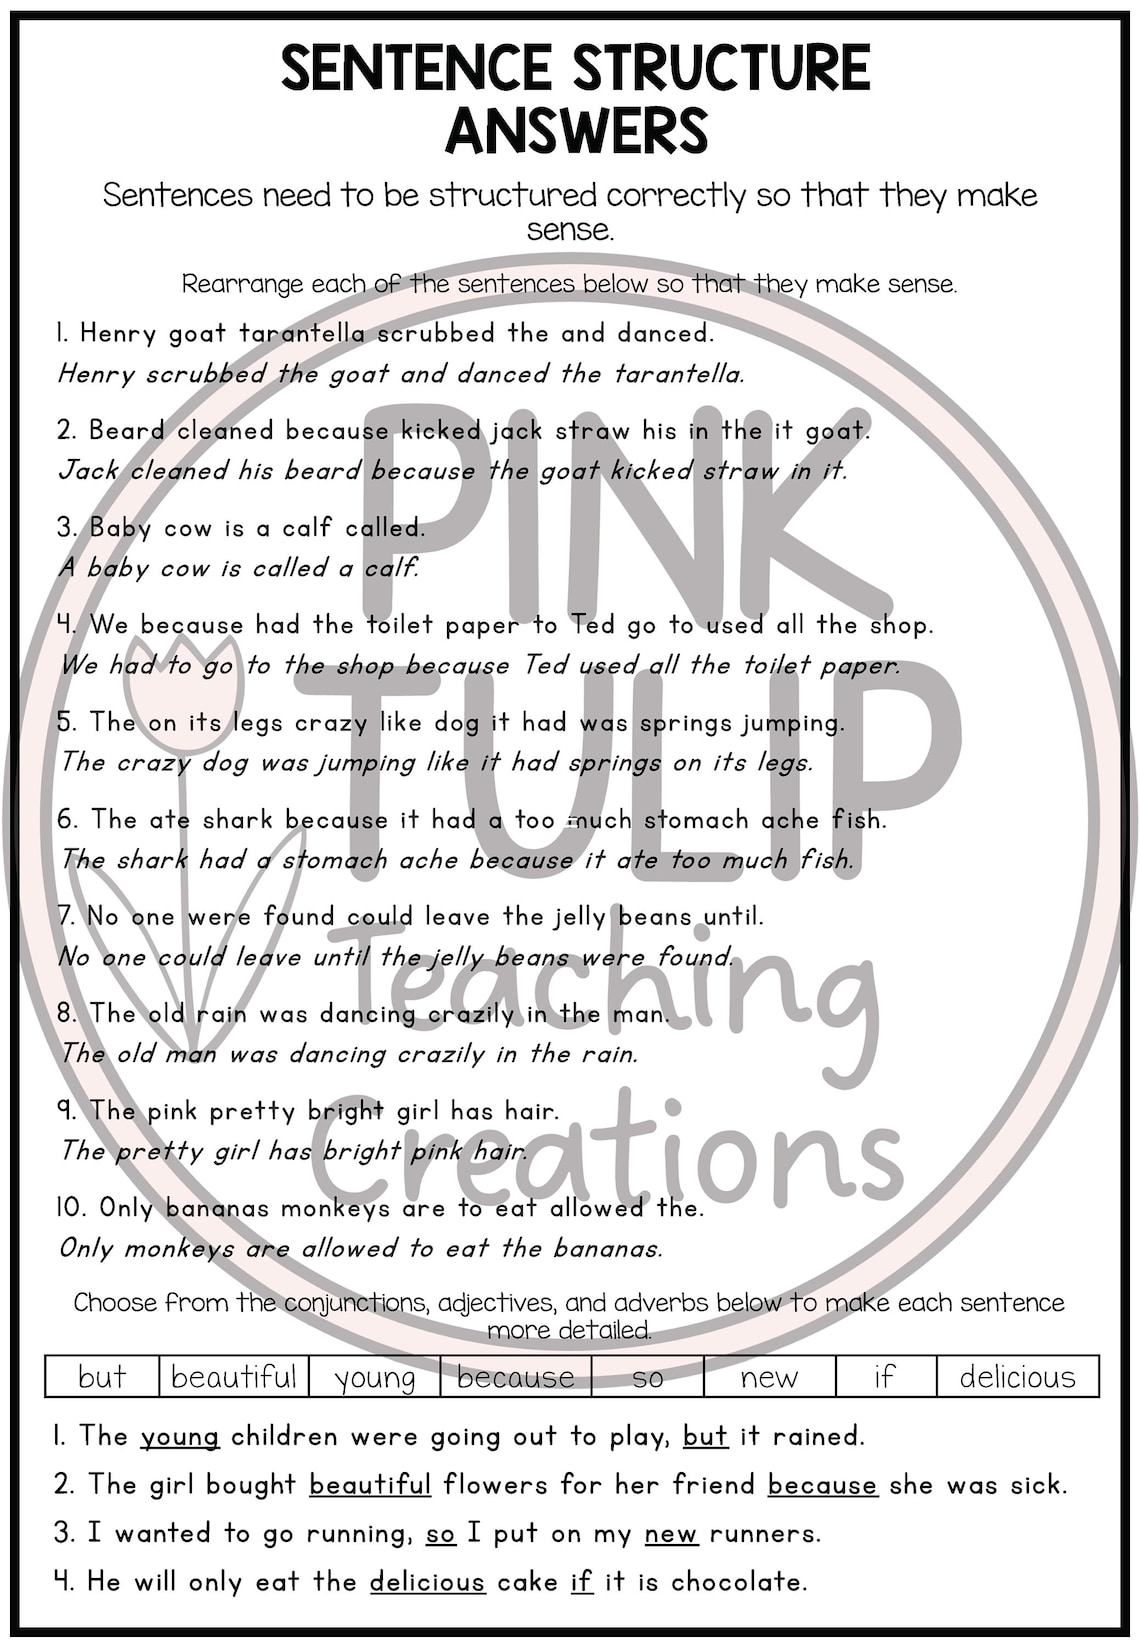 Sentence Structure Worksheets For 4th Grade